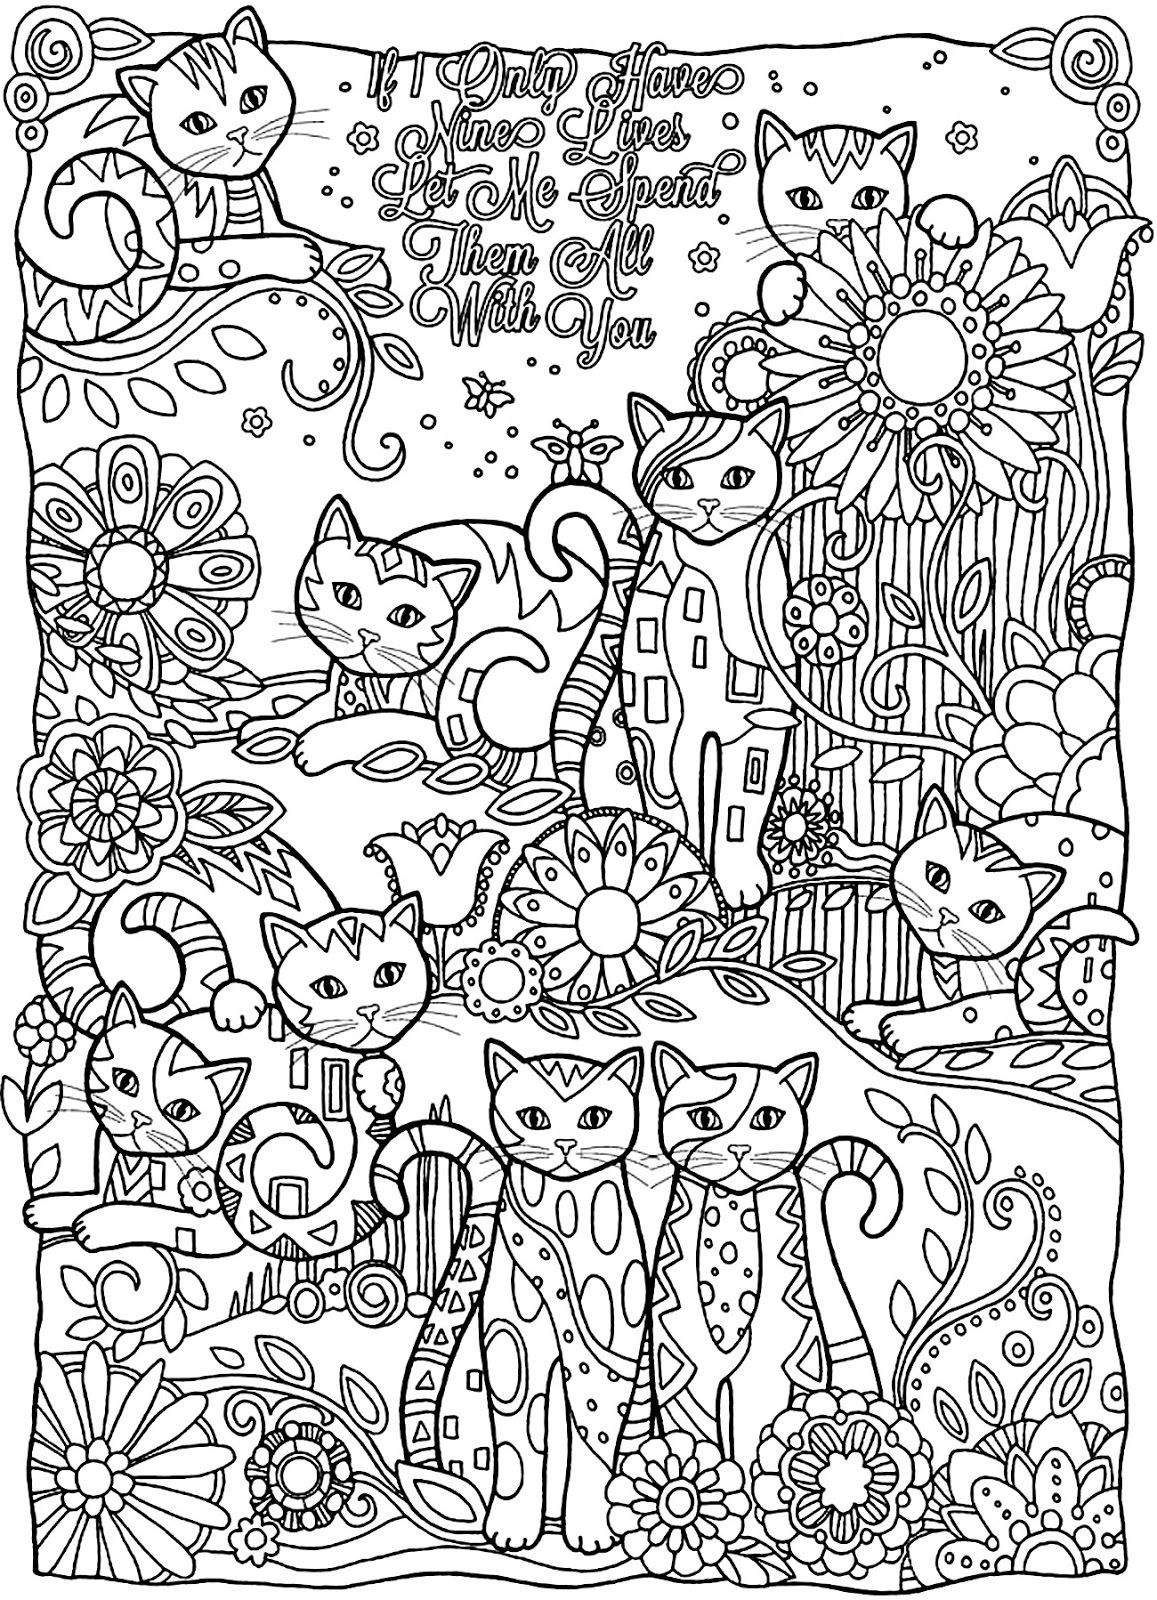 Adult colouring | Free coloring ...